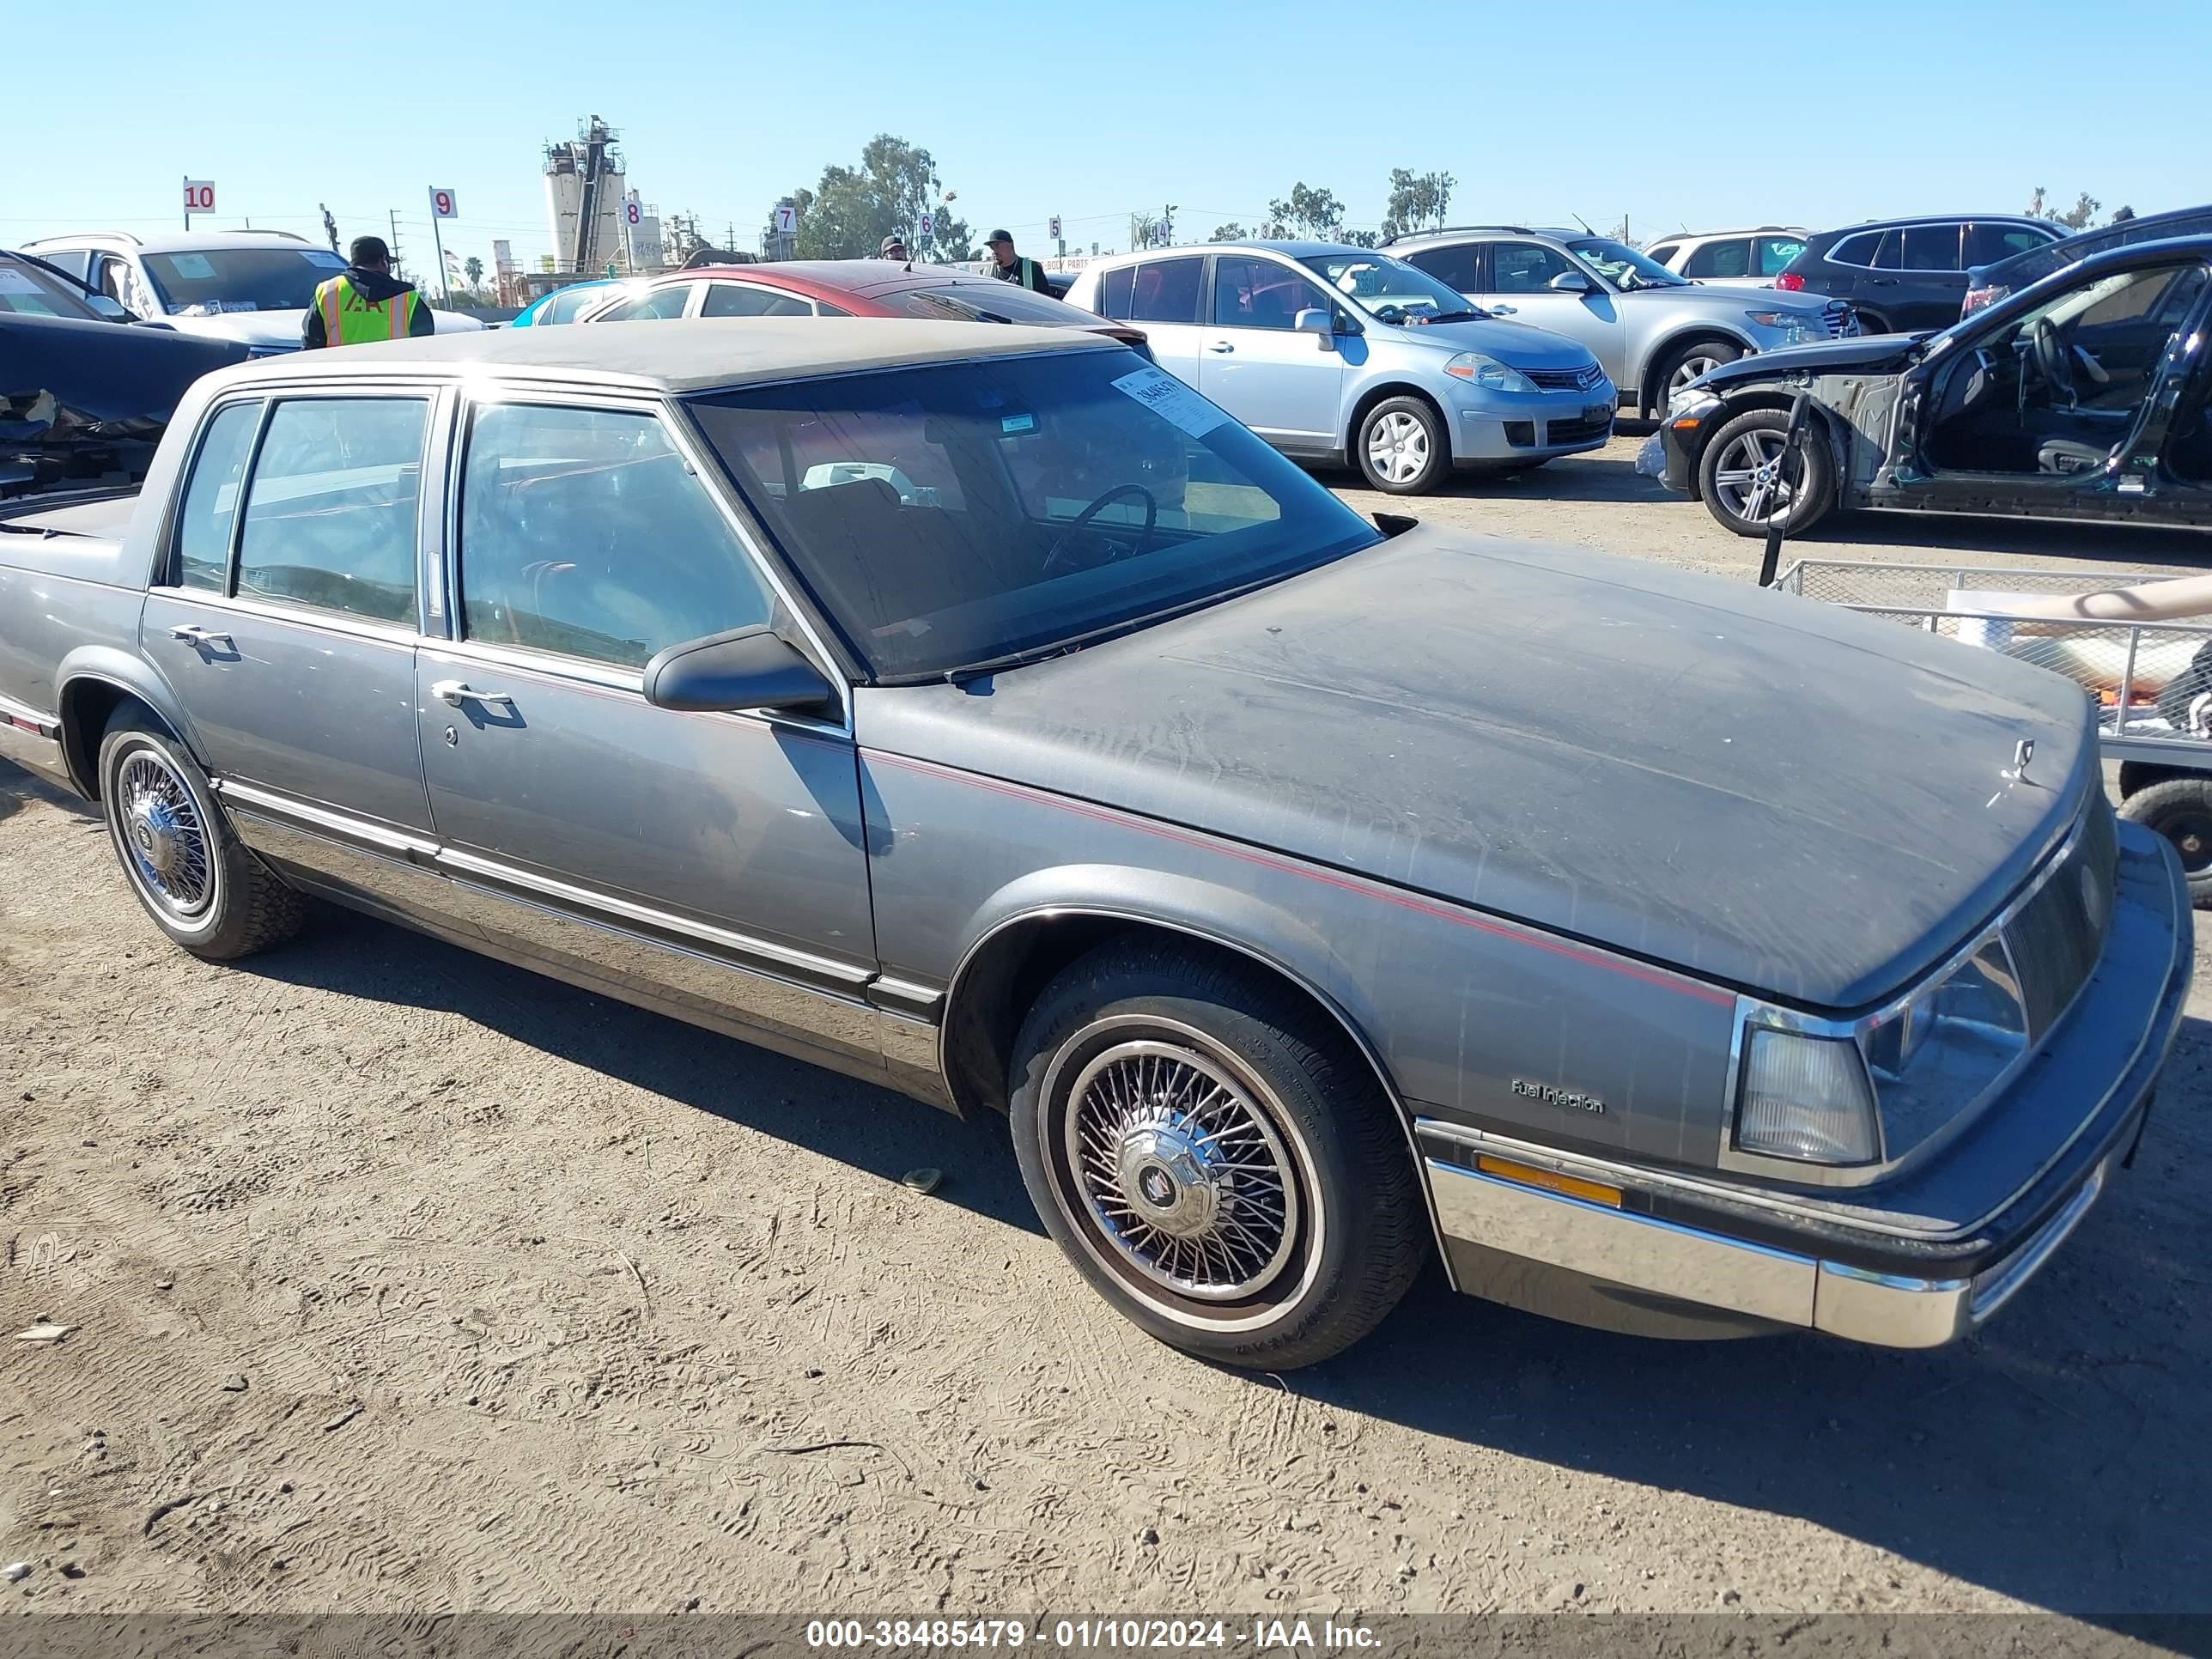 vin: 1G4CW6933F1469108 1G4CW6933F1469108 1985 buick electra 3800 for Sale in 91605, 7245 Laurel Canyon Blvd, Los Angeles, USA